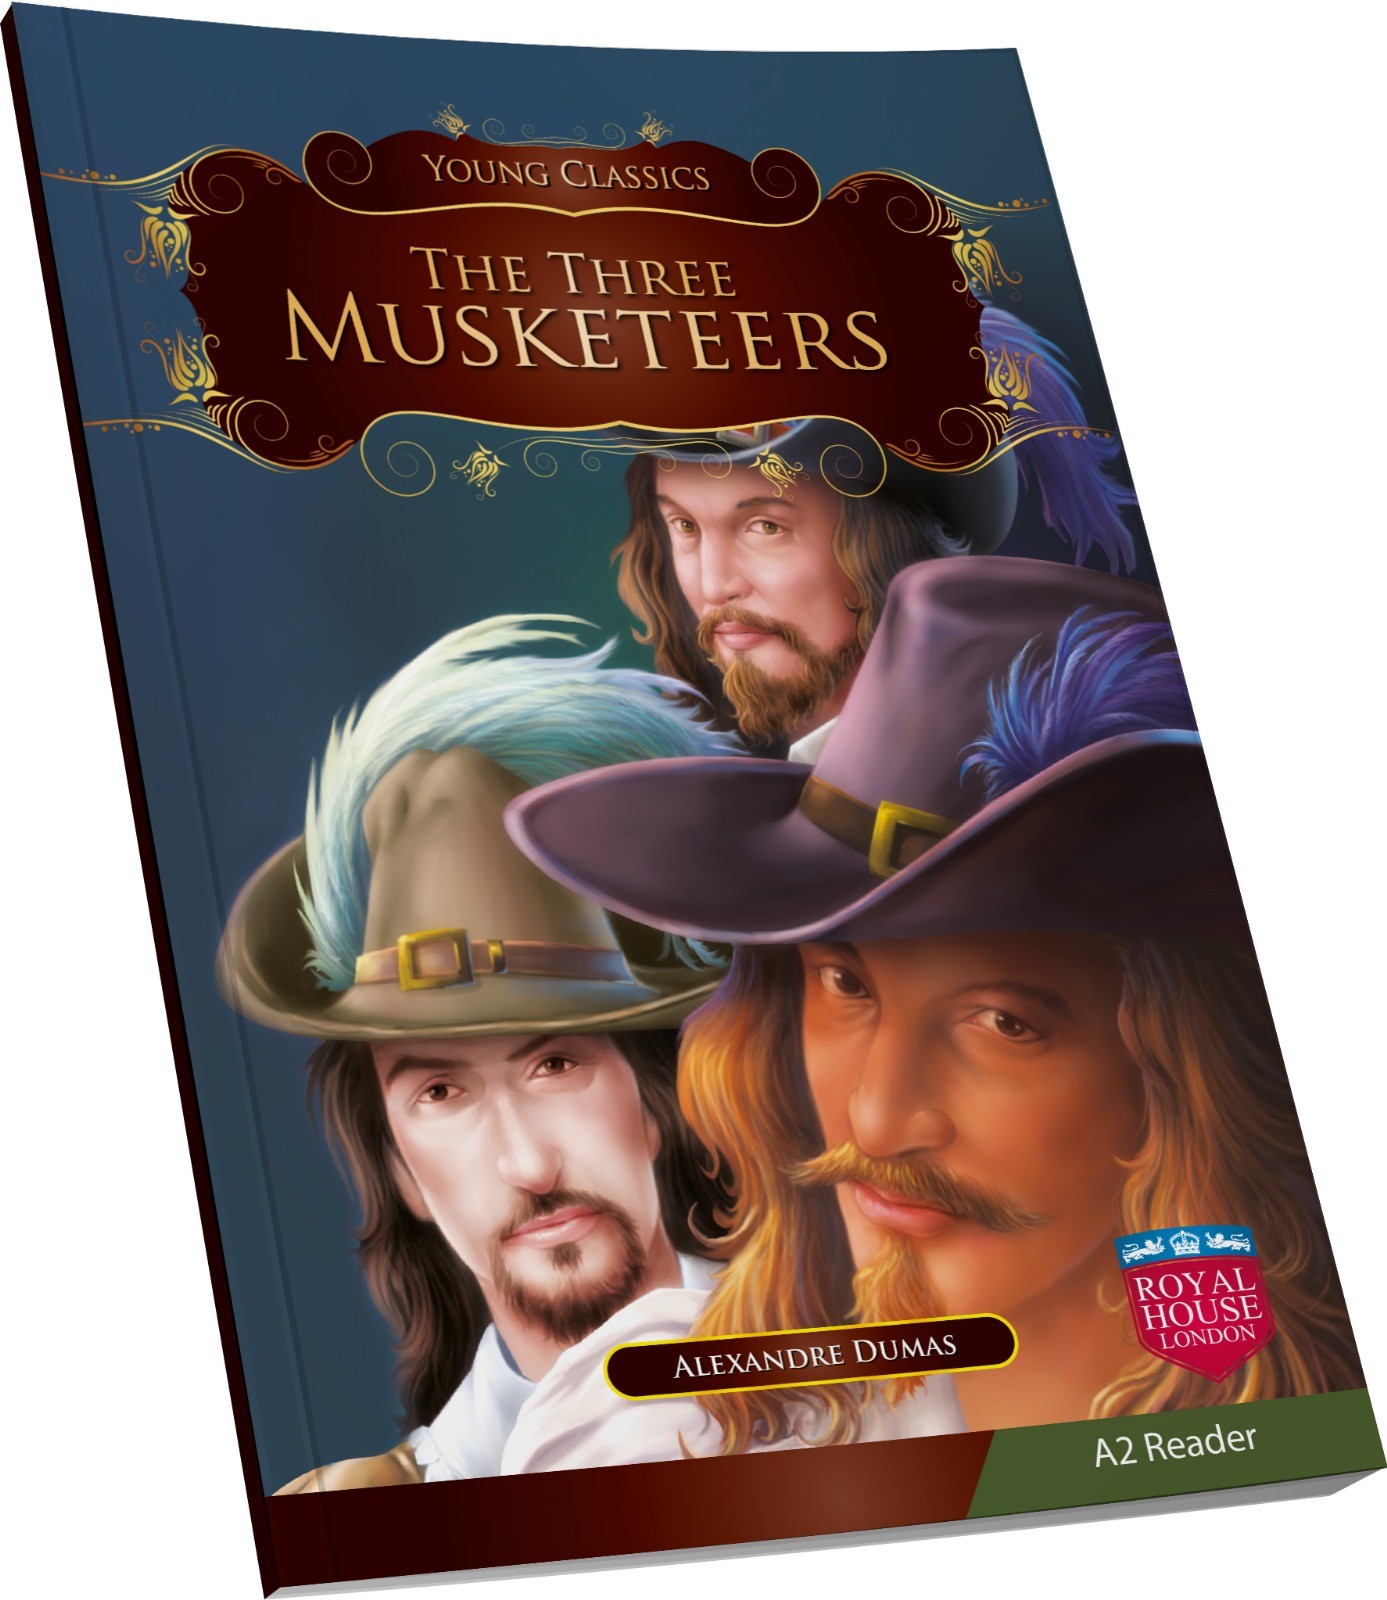 THE THREE MUSKETEERS A2 Reader